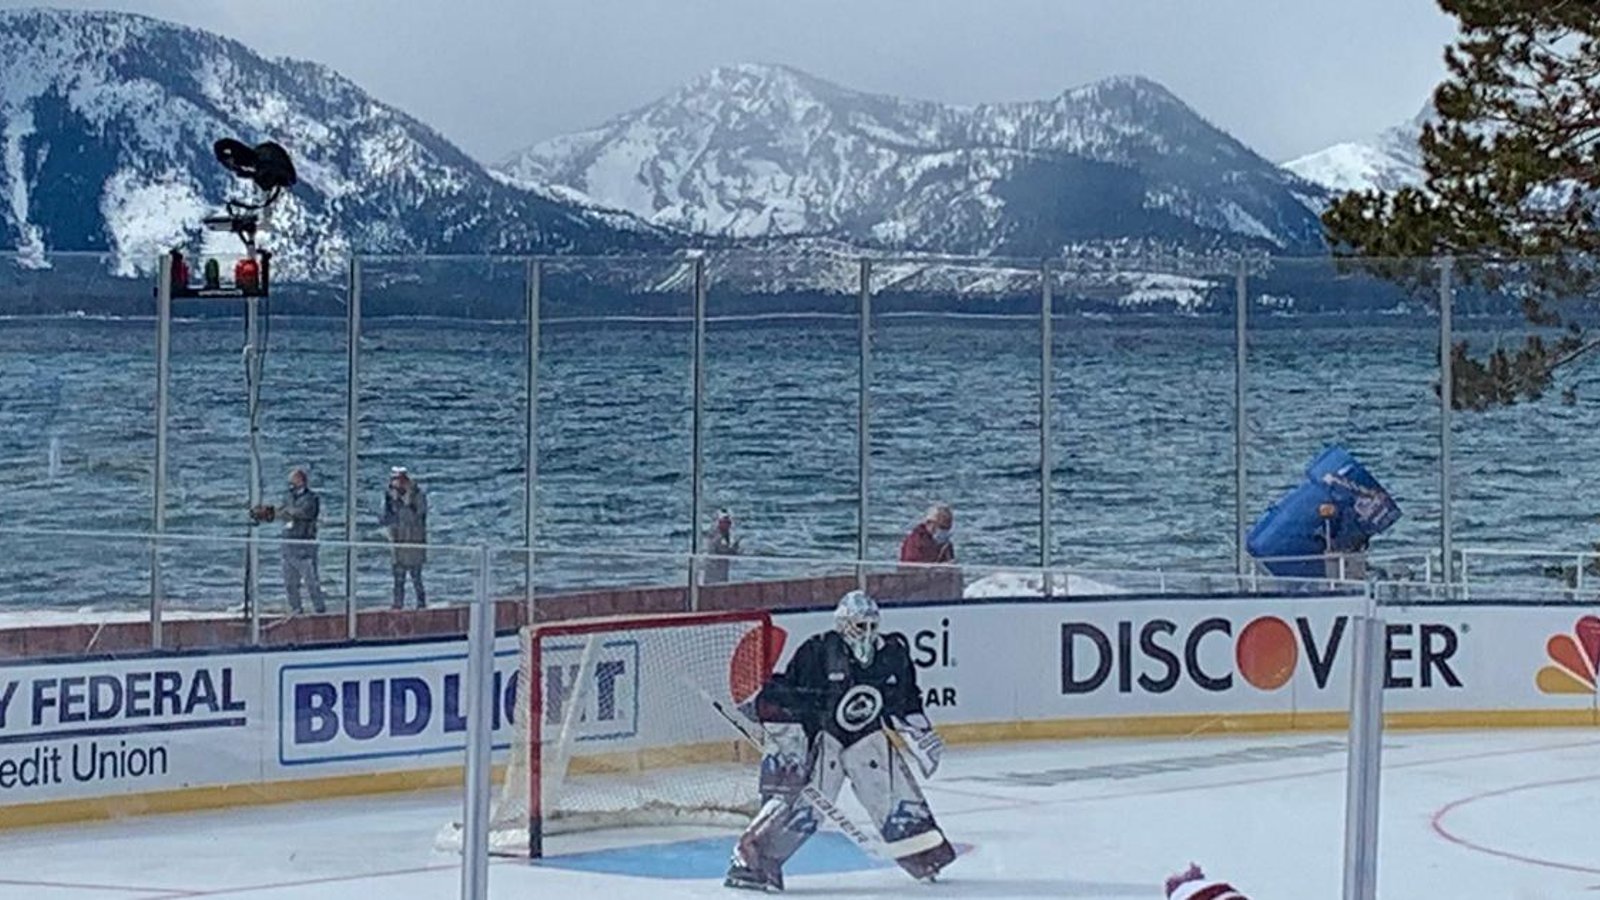 One team to blame for today's disaster in Lake Tahoe?